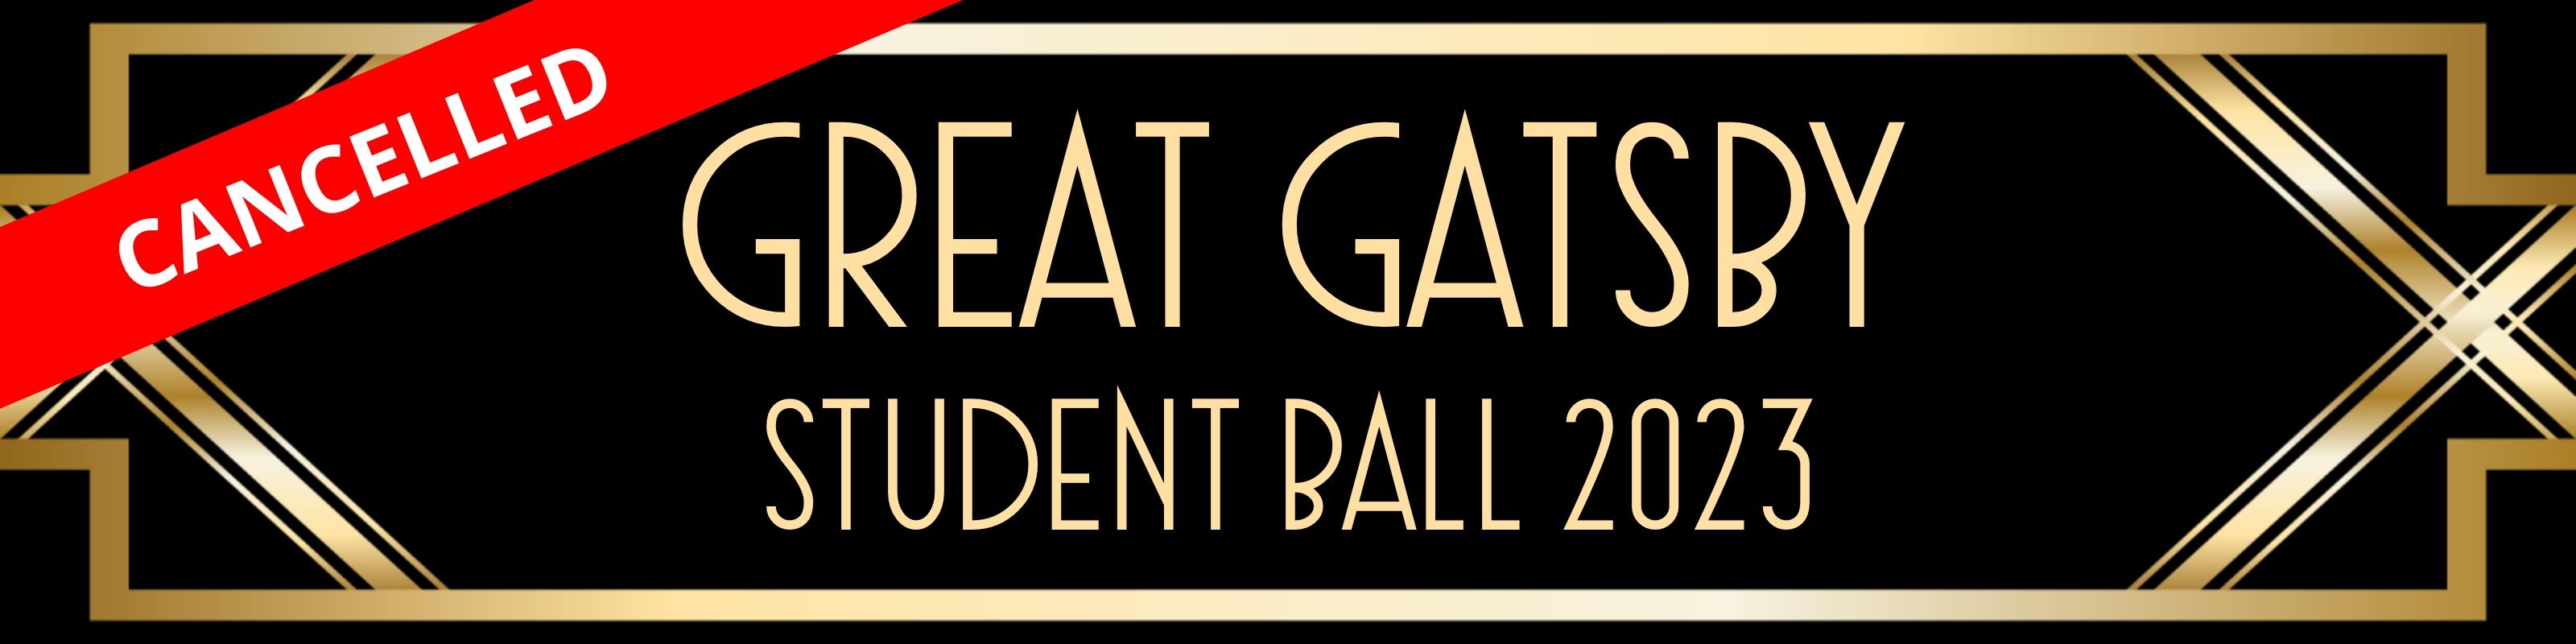 Student Ball Cancelled